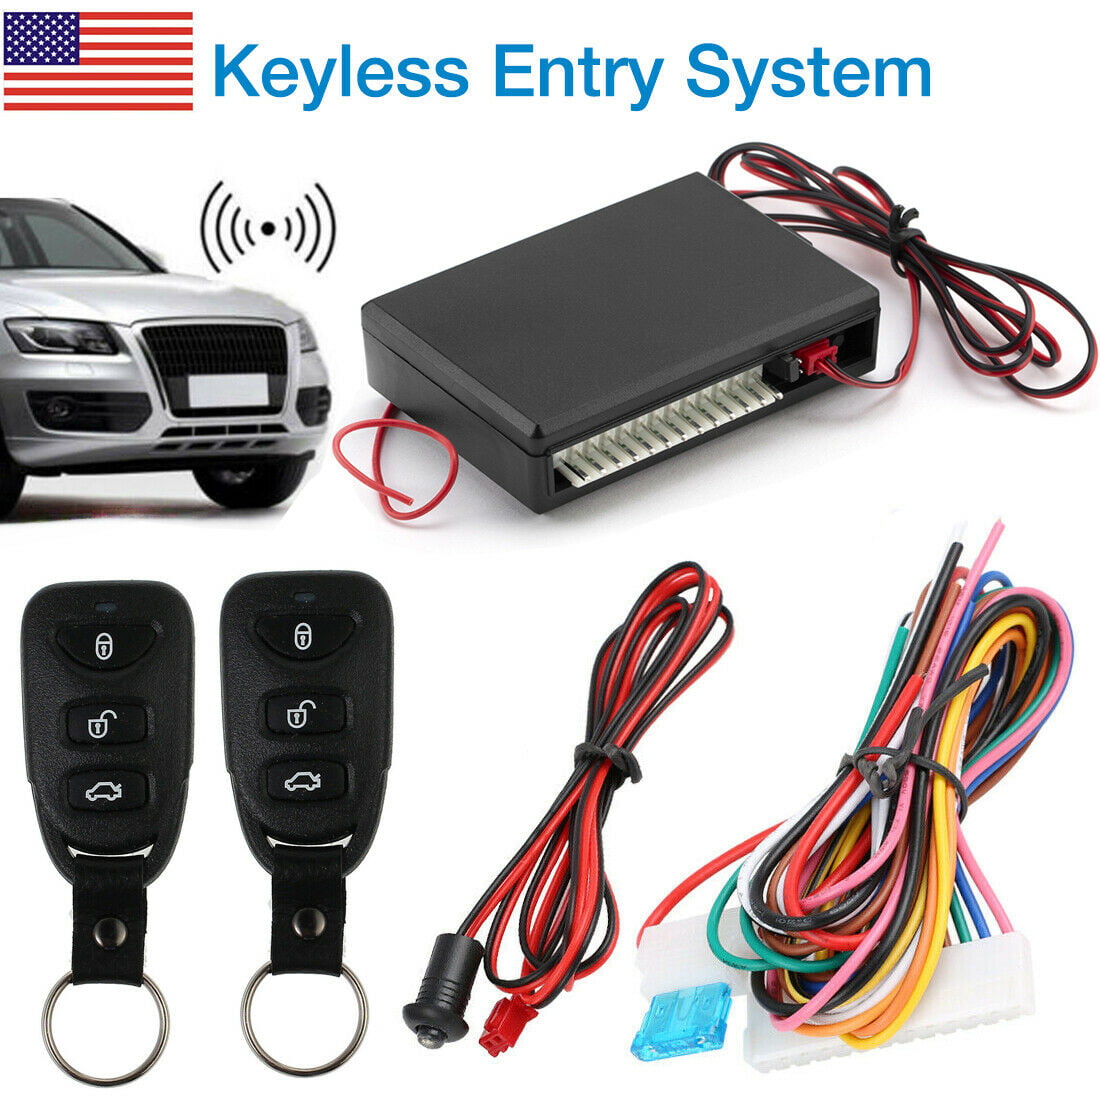 Universal Car Door Lock Vehicle Keyless Entry System Remote Control Central Kit 